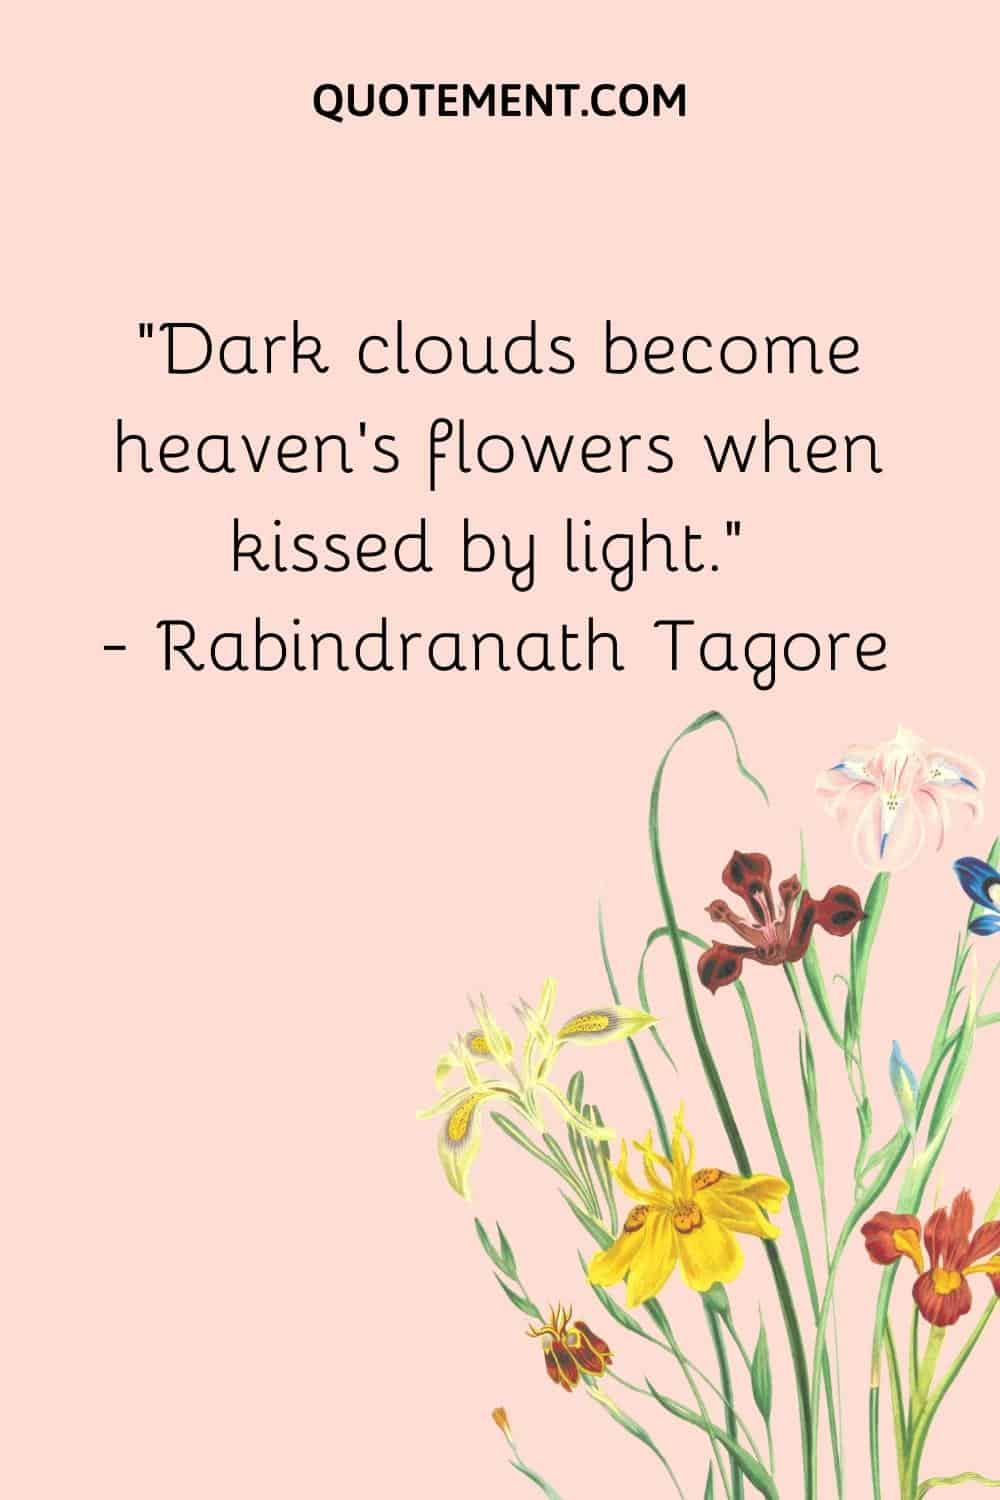 “Dark clouds become heaven’s flowers when kissed by light.” — Rabindranath Tagore